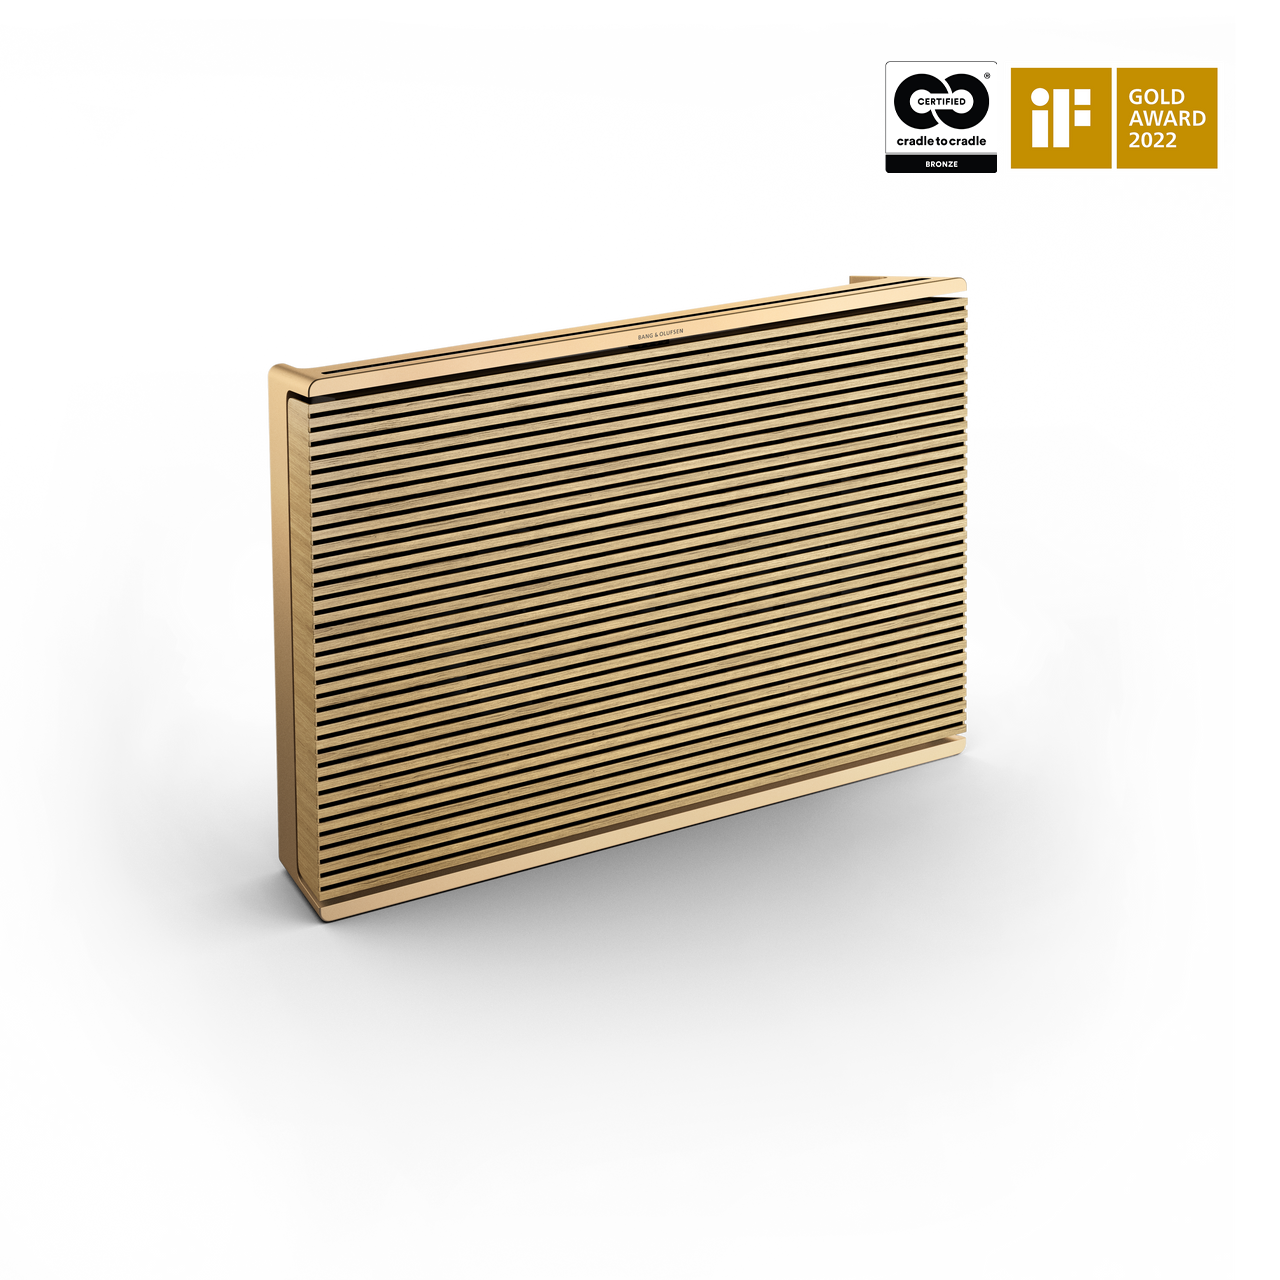 The Beosound Level Wireless Speaker Is A Design Classic With Impeccable  Green Credentials